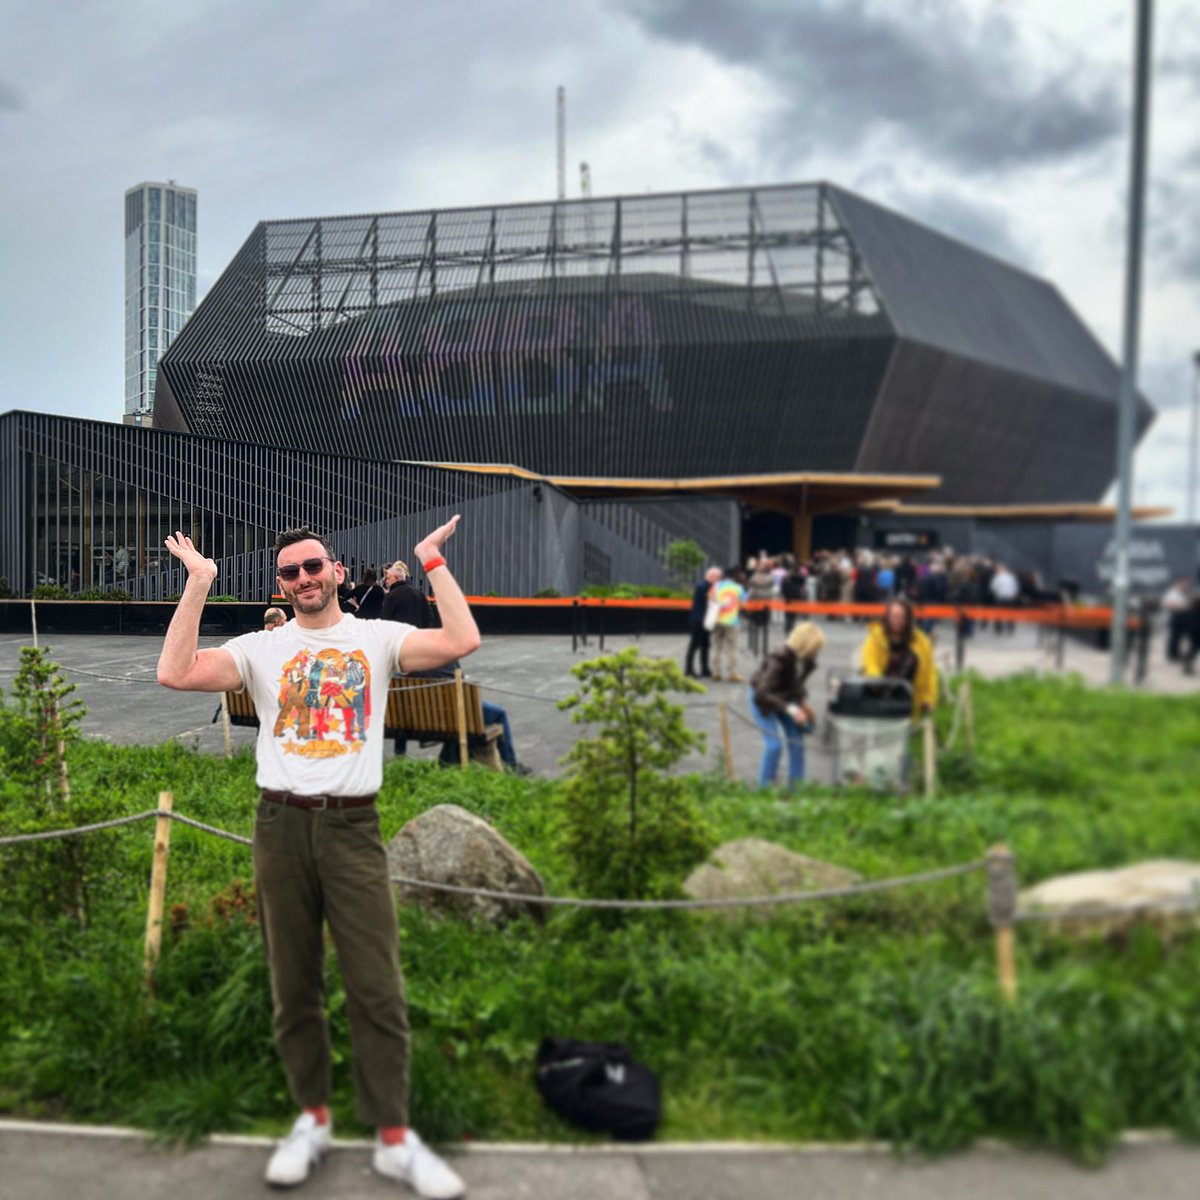 50 years ago today, @ABBA won Eurovision so we took a pilgrimage to Stratford for another @ABBAVoyage. 🕺🏻